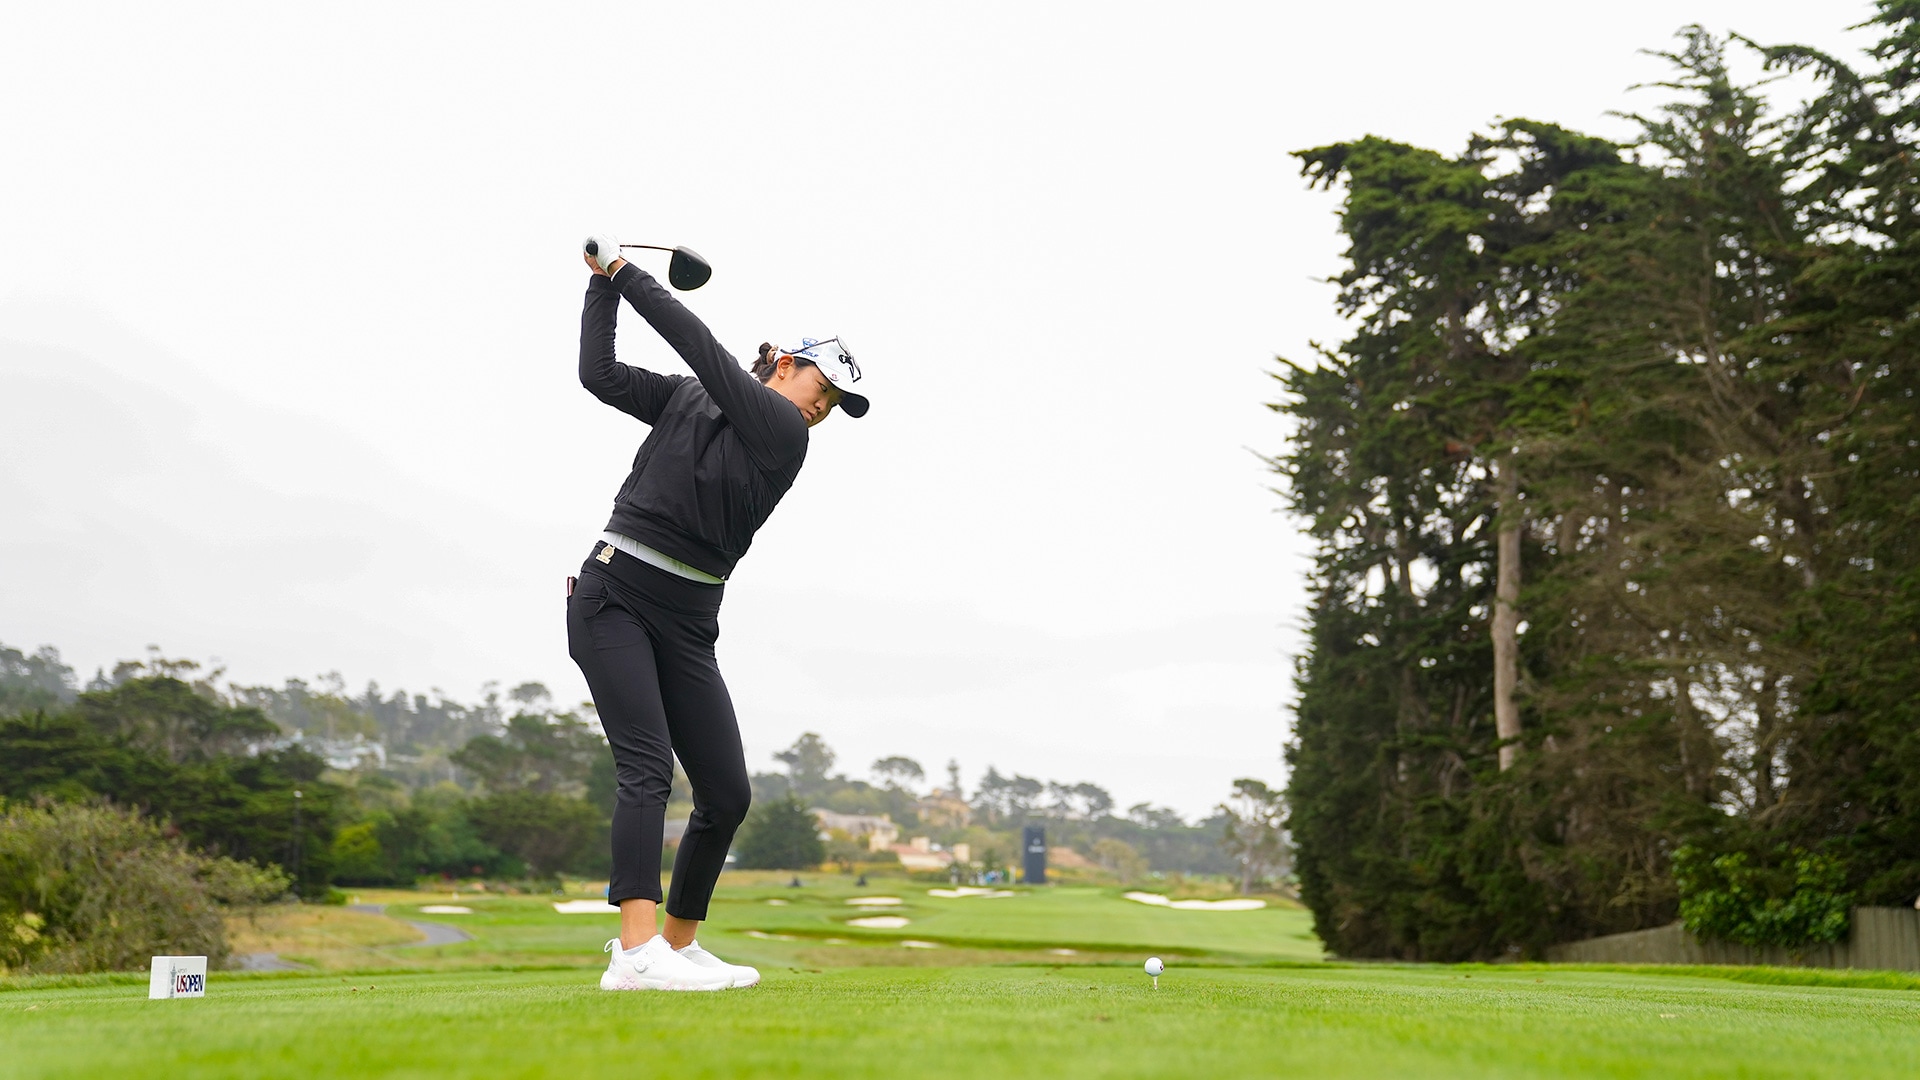 2023 U.S. Women’s Open: Already with a Pebble Beach record, Rose Zhang looks to do the remarkable again